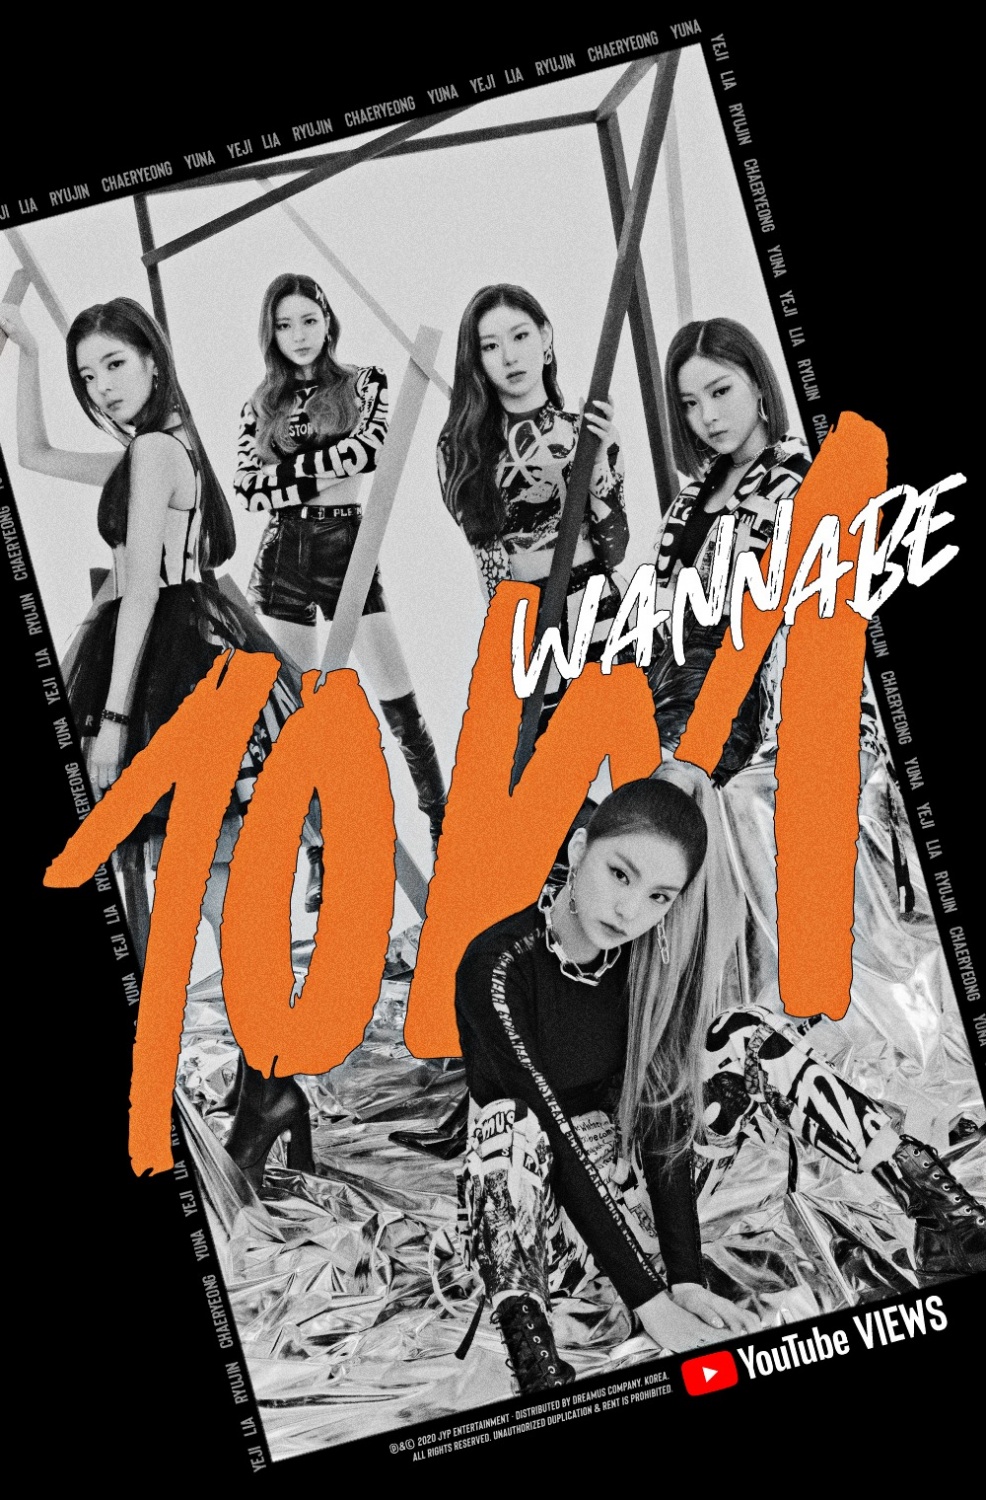 ITZY Launches New Song 'WANNABE' TikTok Dance Challenge